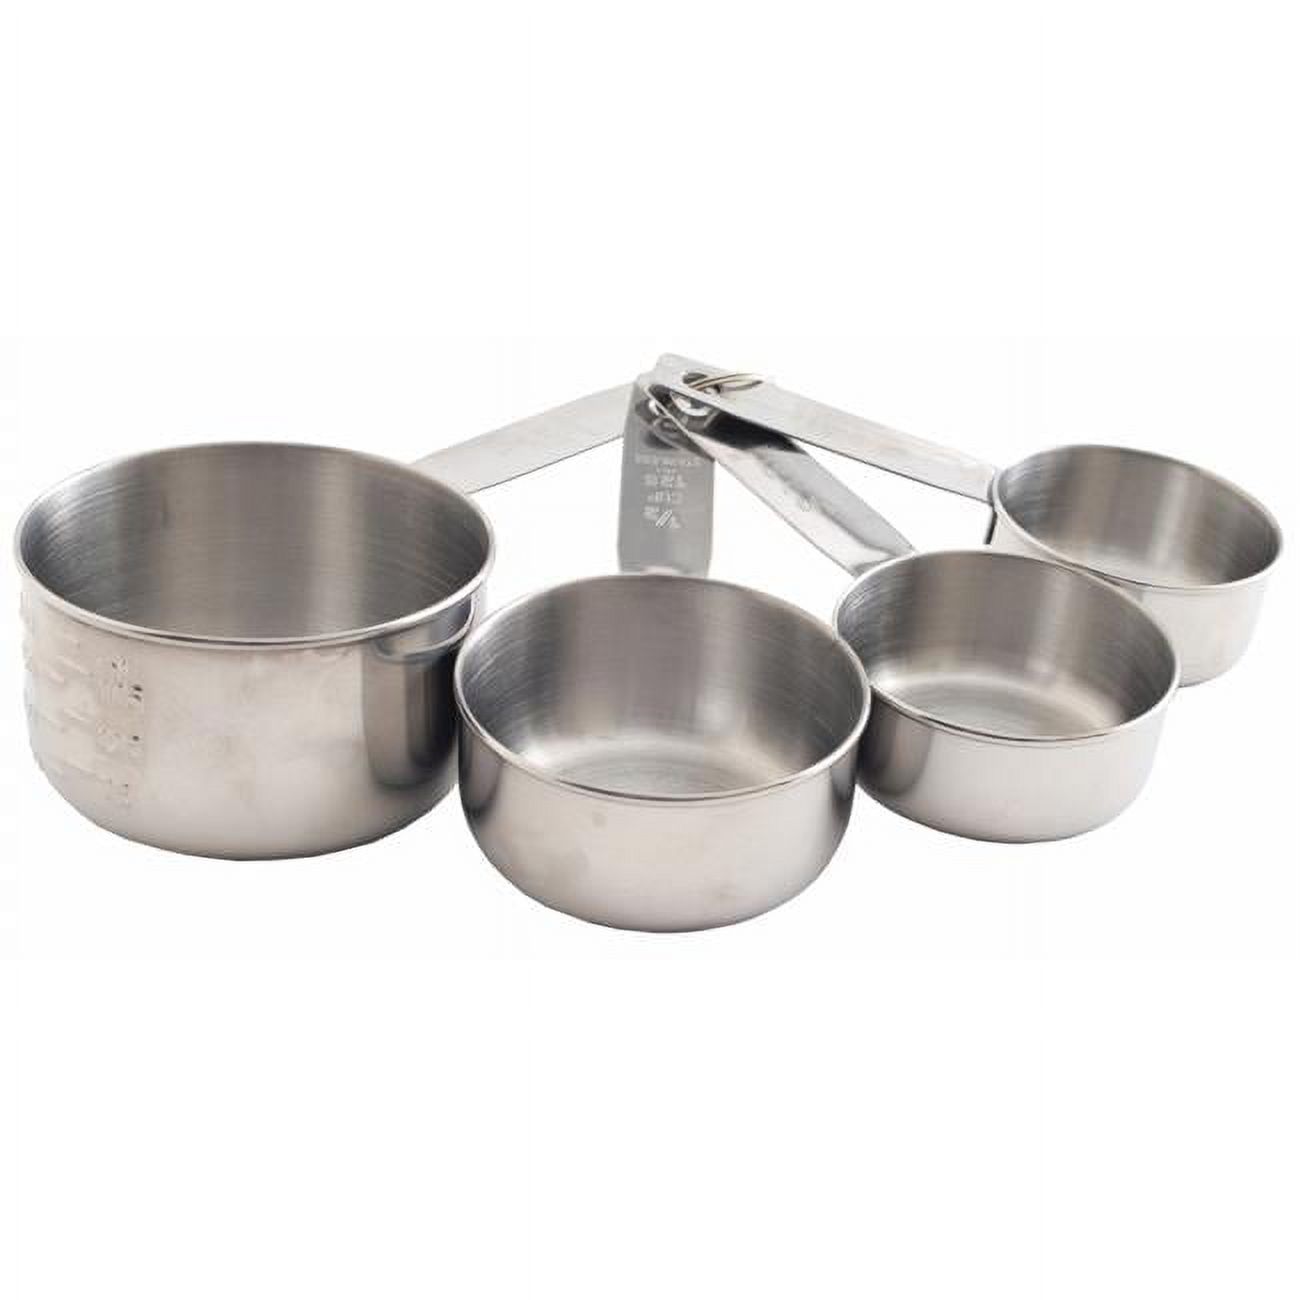 Norpro Stainless Steel Measuring Cup Set 4 Piece - image 1 of 2